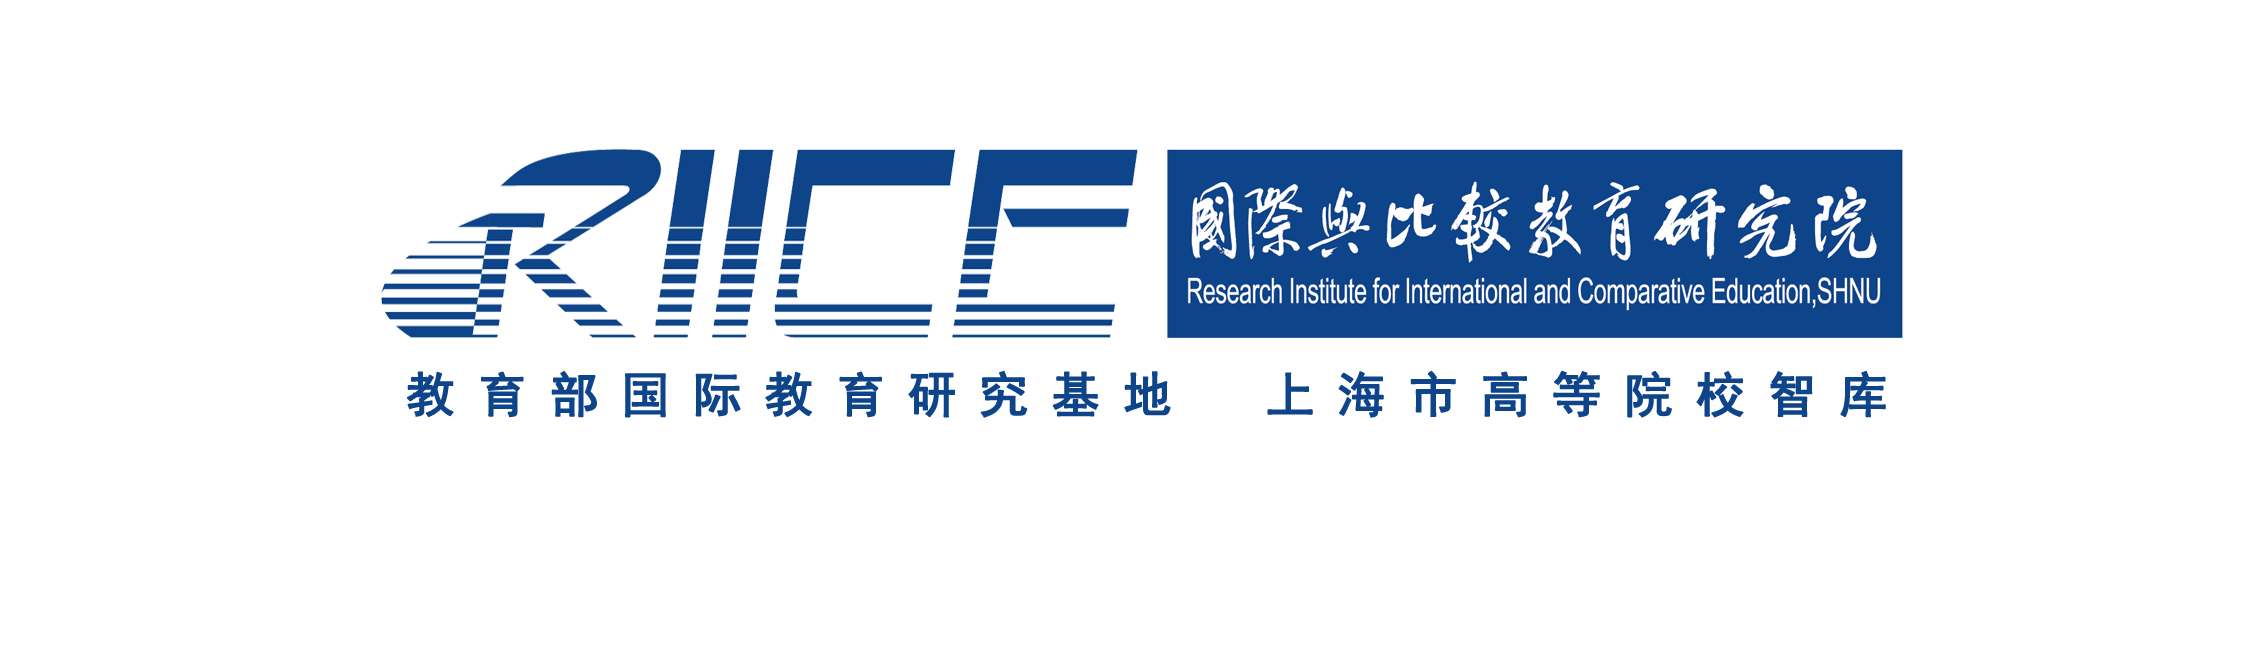 Research Institute for International and Comparative Education logo, bottom.png